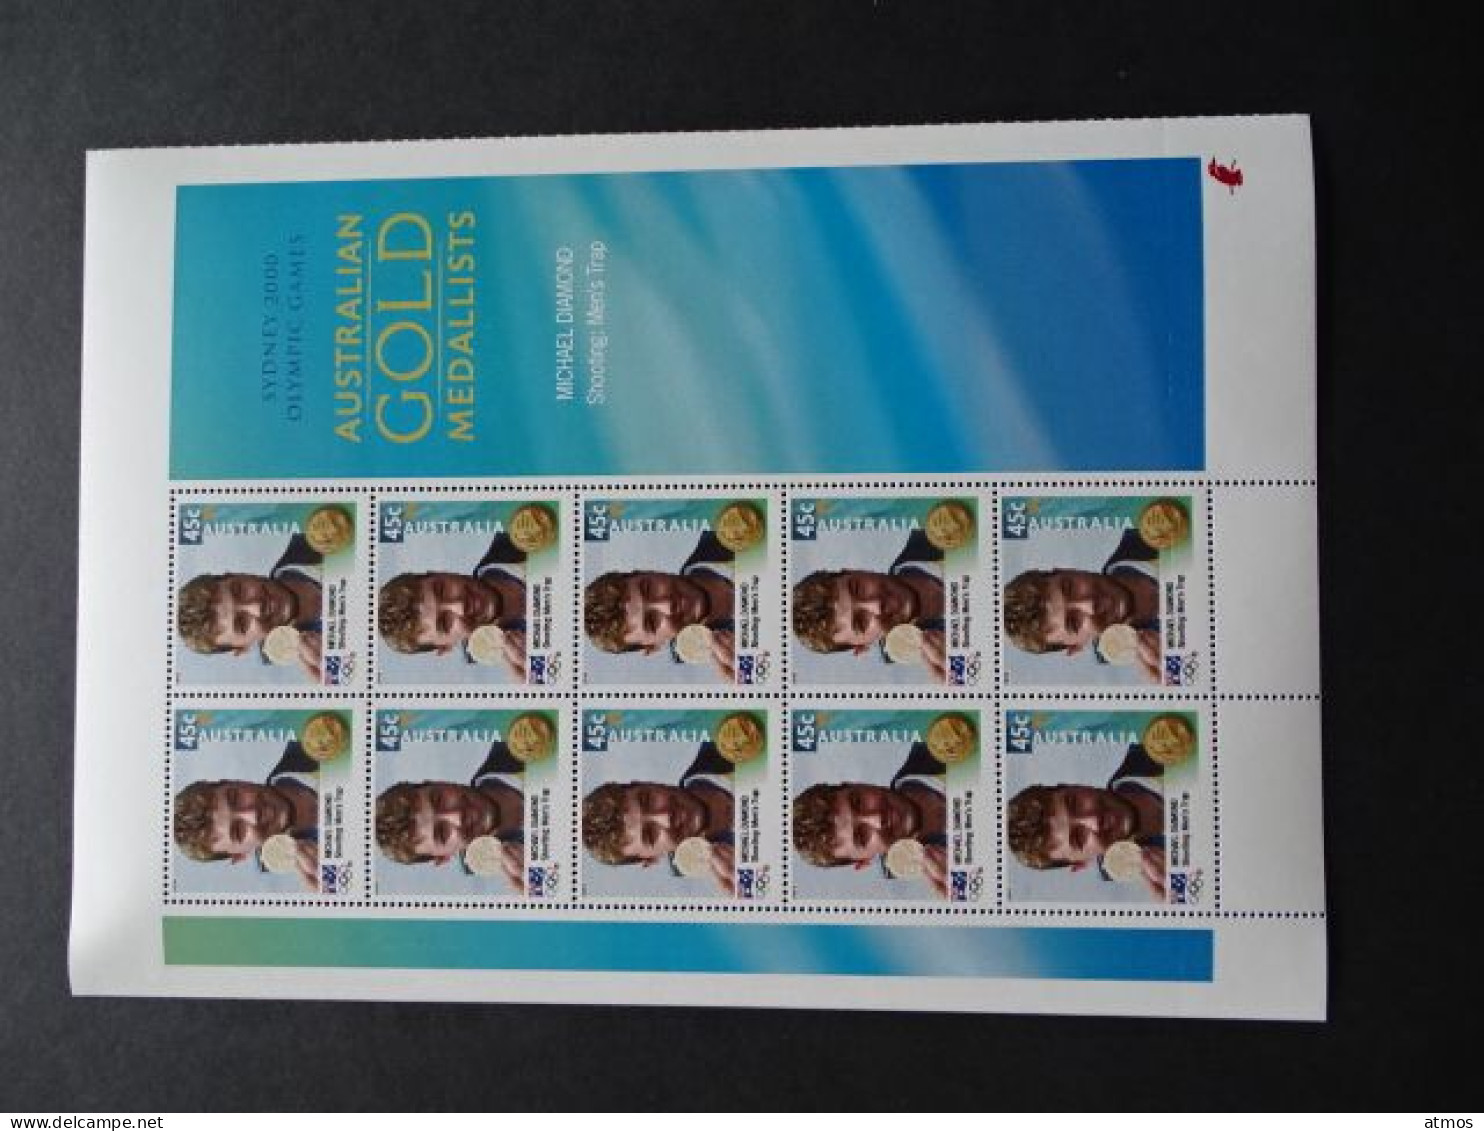 Australia MNH Michel Nr 1975 Sheet Of 10 From 2000 ACT - Mint Stamps